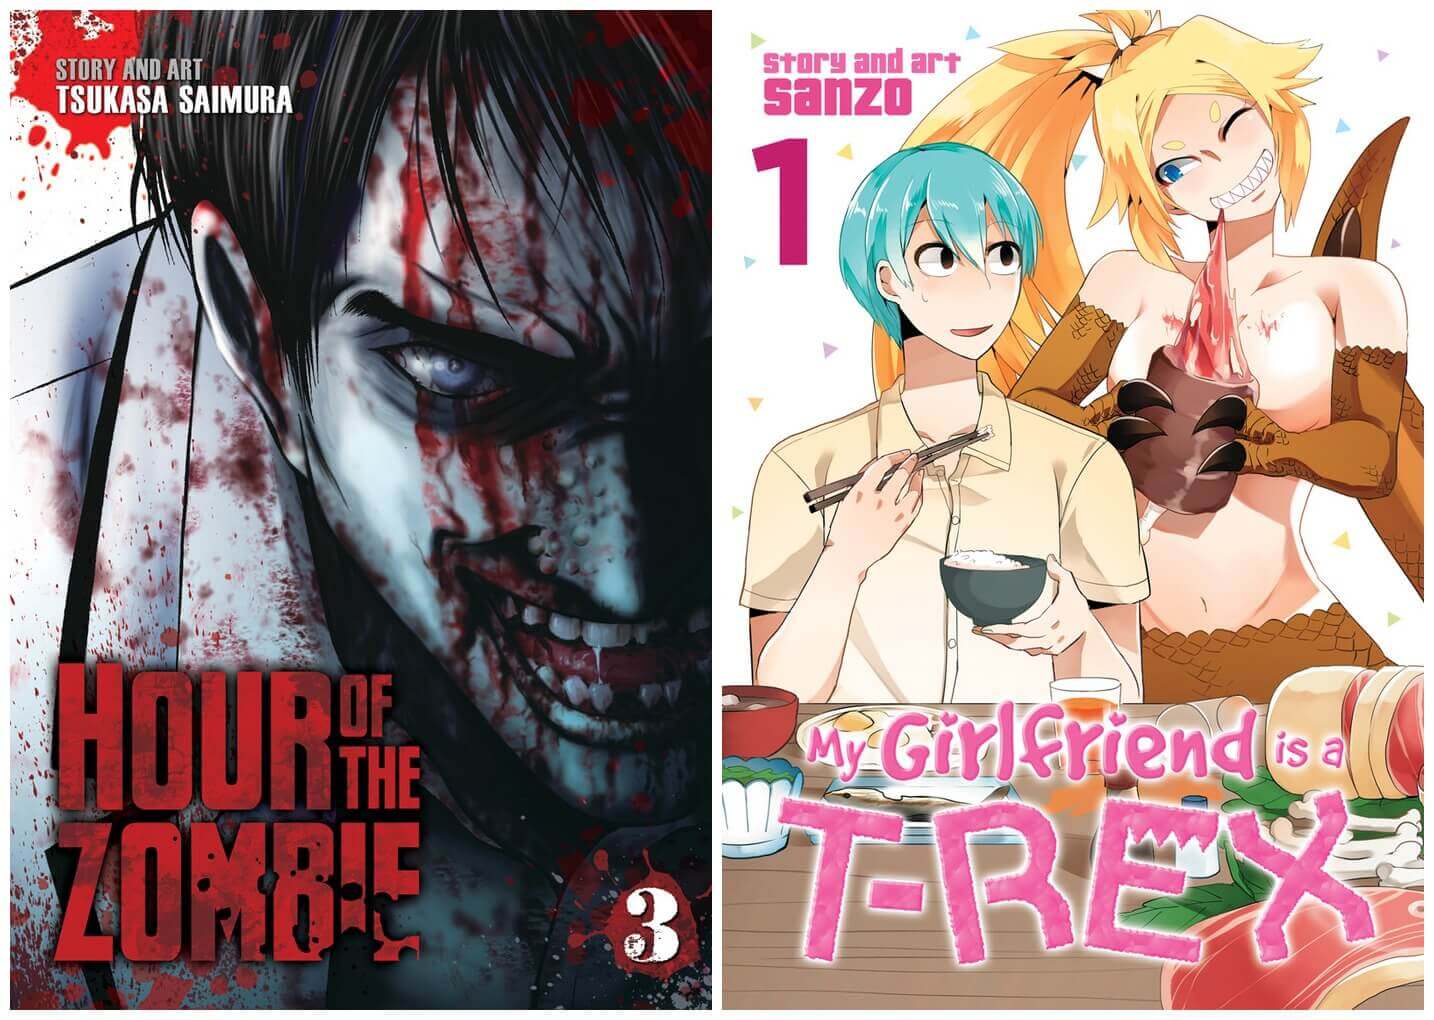 November 2016 Manga Releases Covers for Hour of the Zombie and My Girlfriend is a T-Rex.